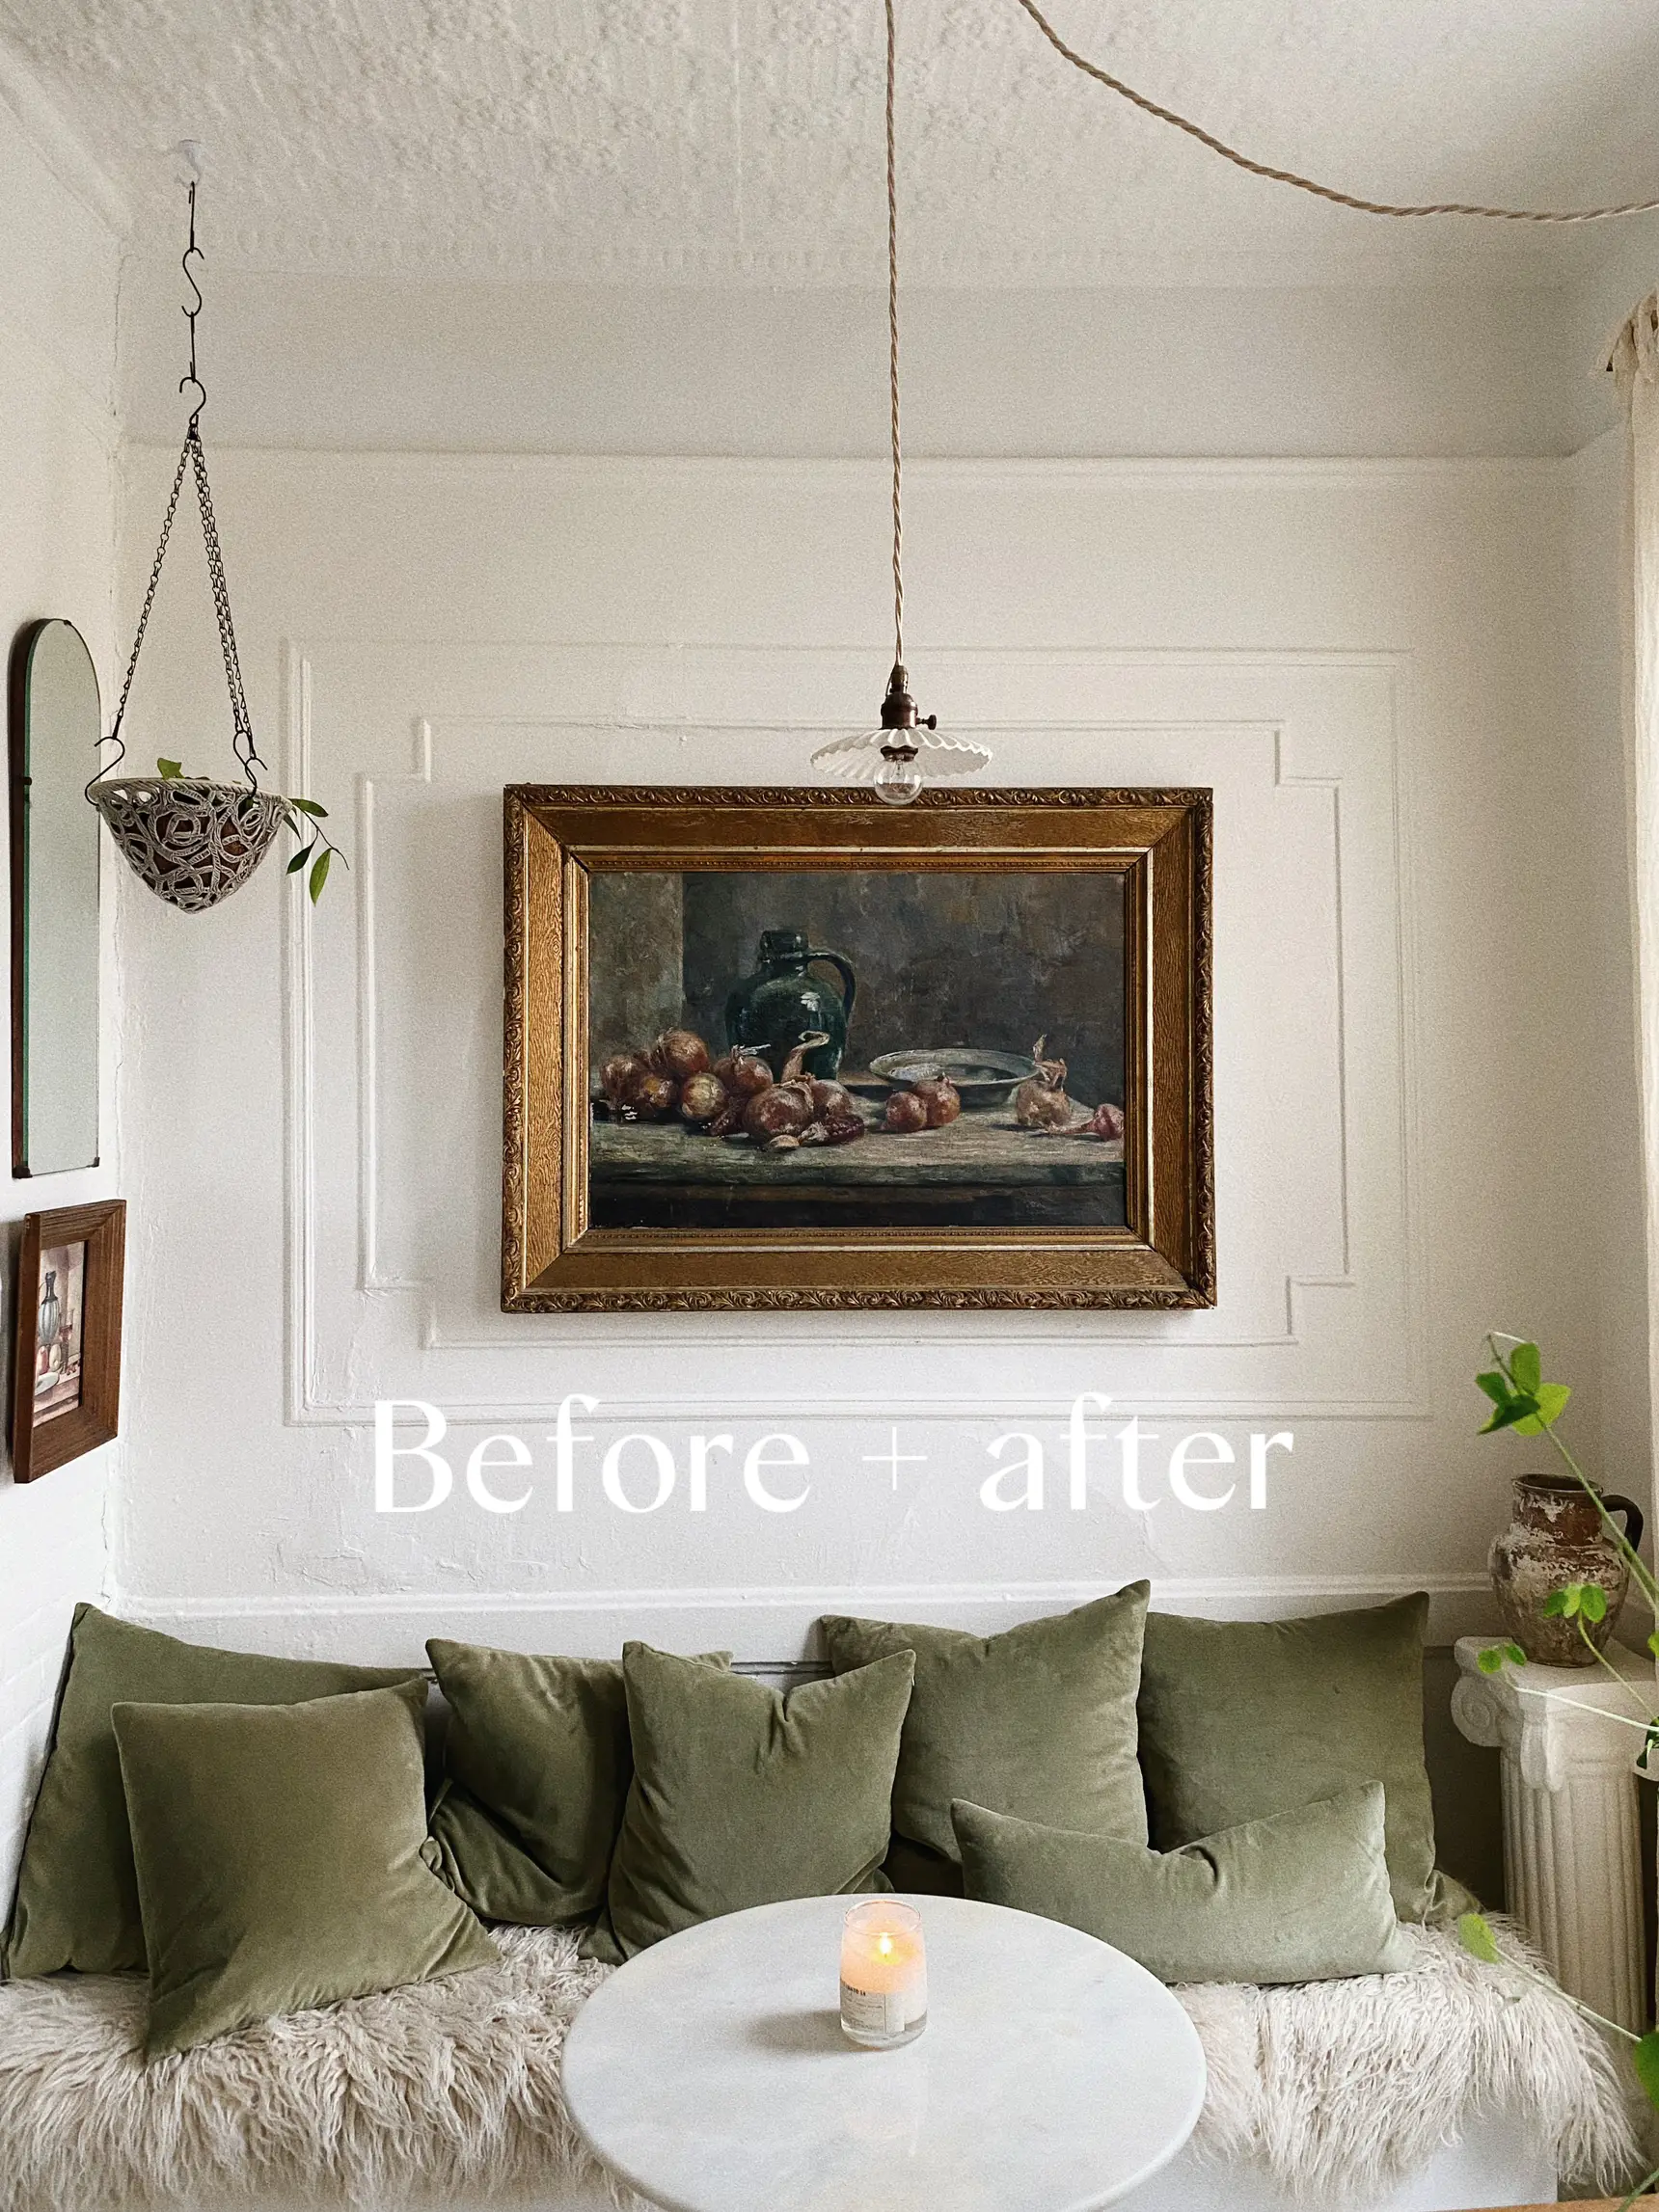 Before & After | Breakfast nook's images